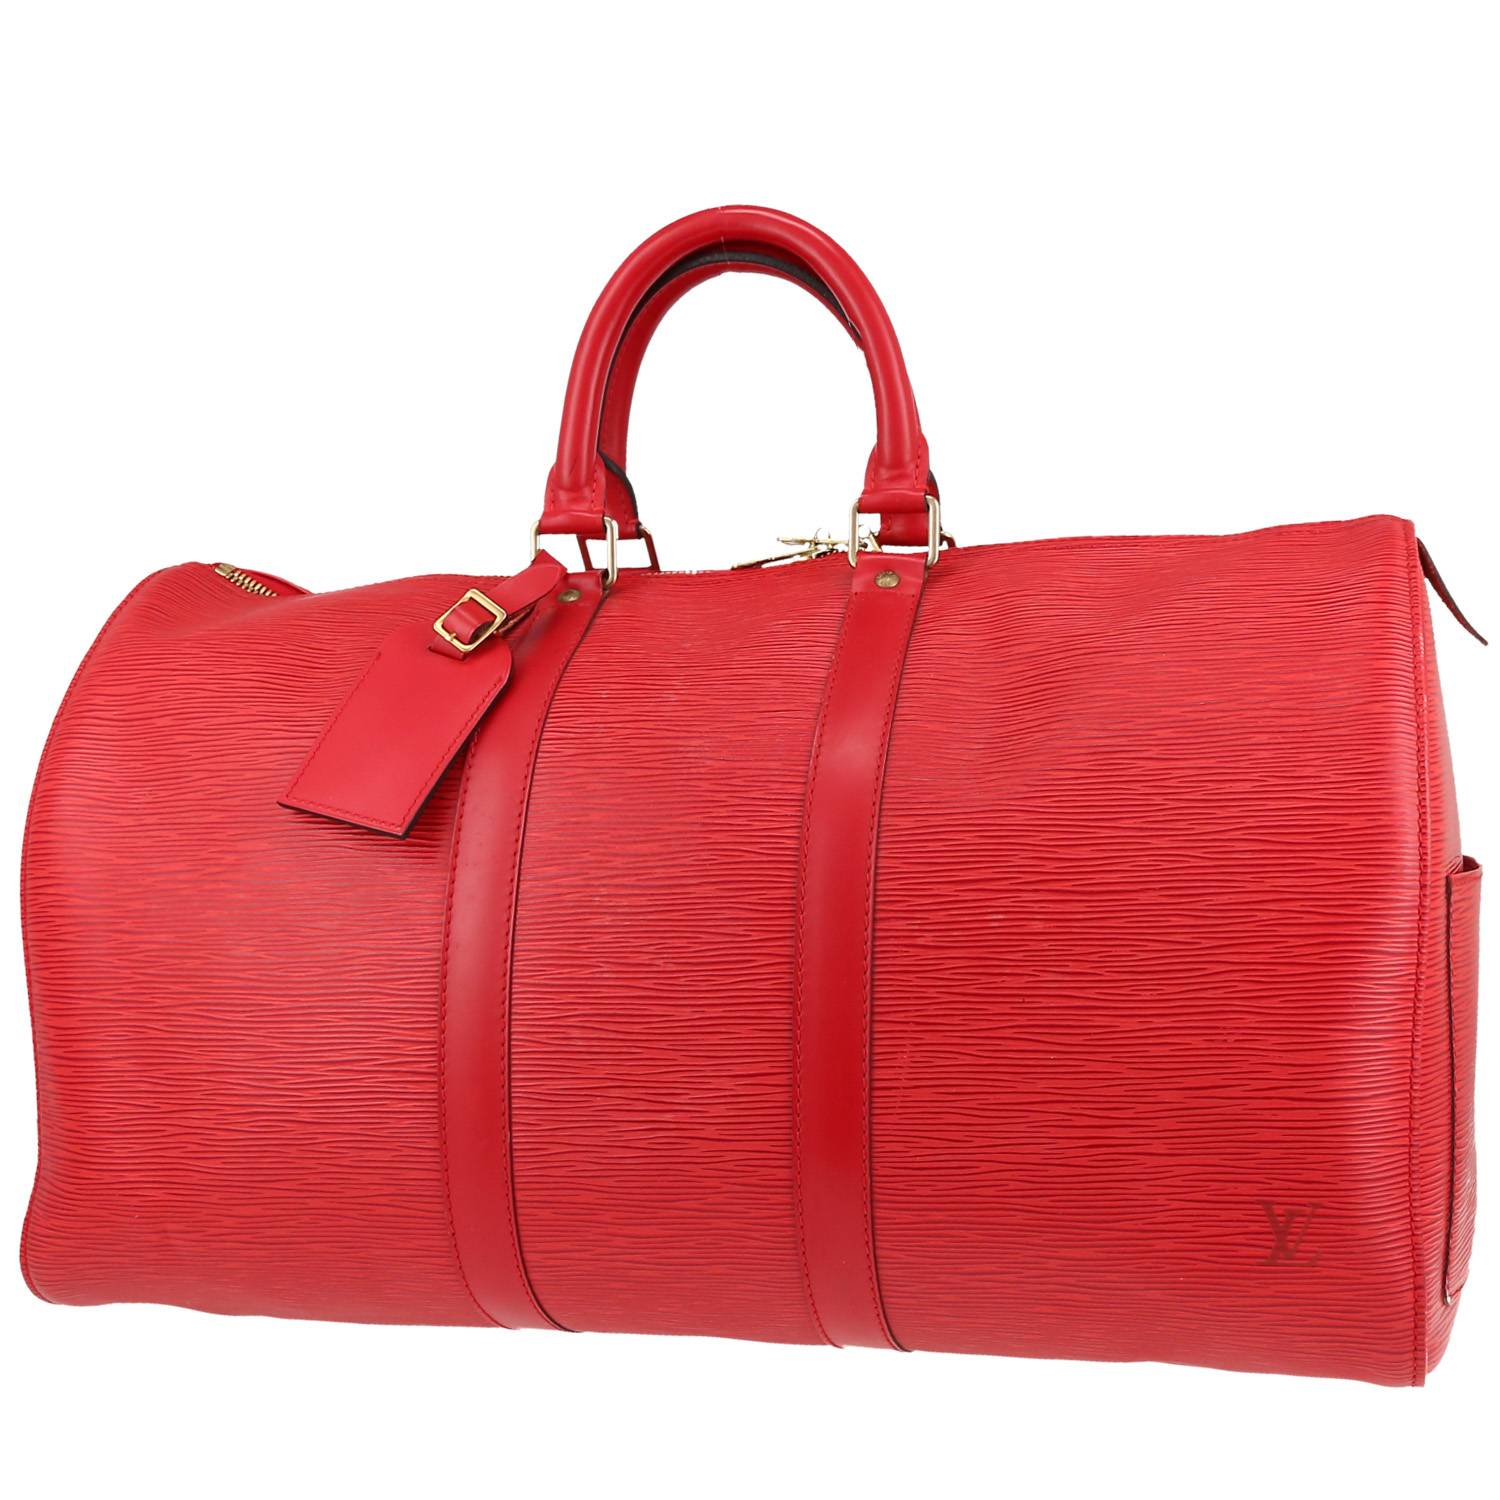 Louis Vuitton Keepall 45 travel bag in red epi leather